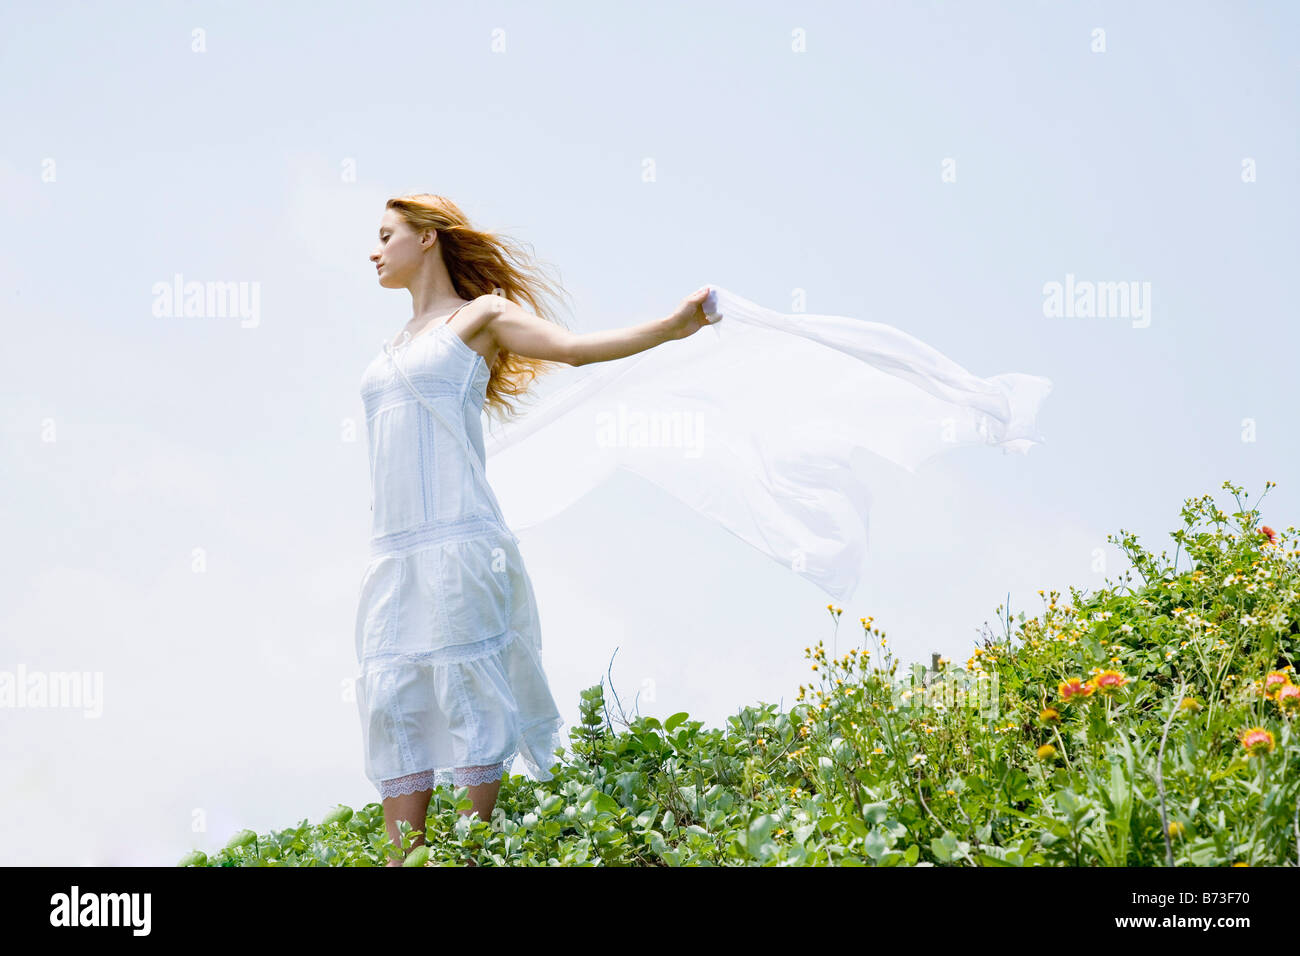 Young woman standing holding out shawl in wind Stock Photo